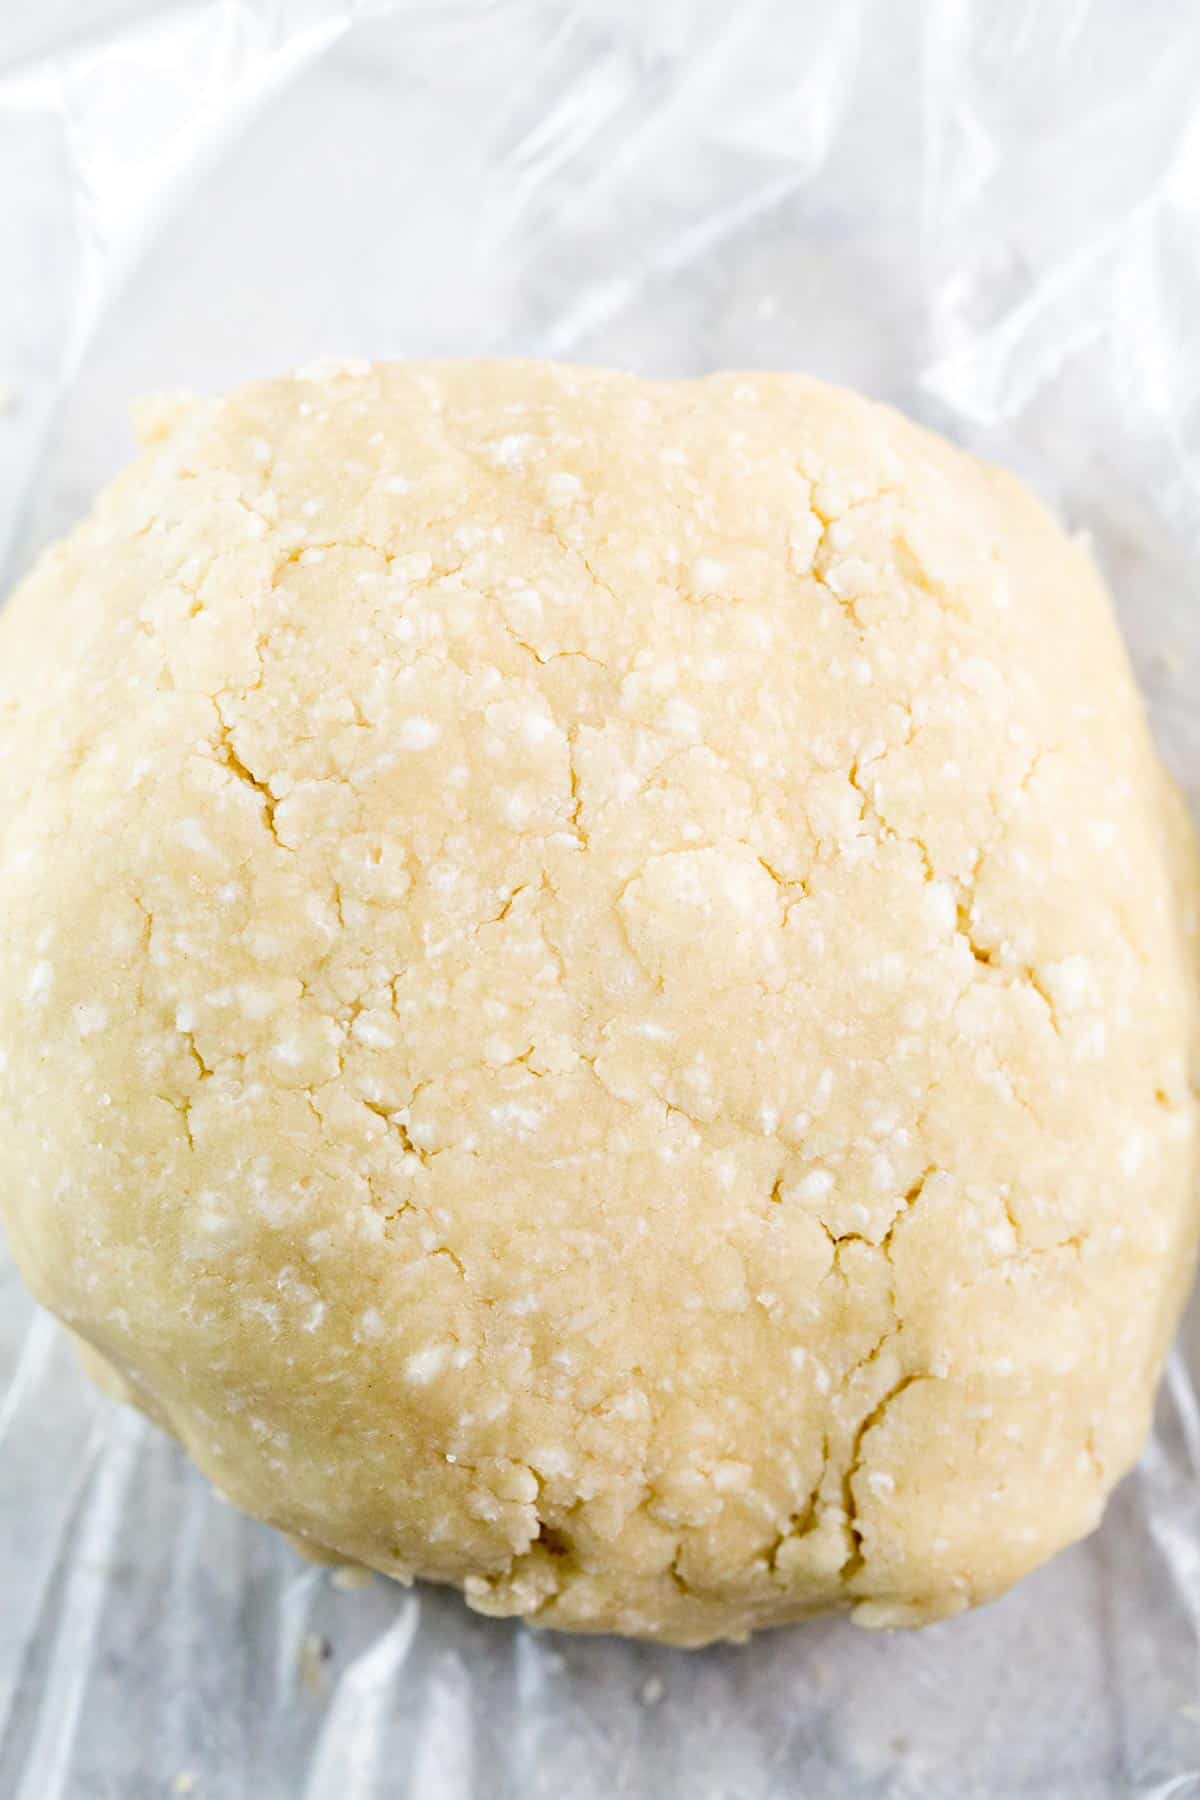 round ball of pie crust dough with visible specks of butter.